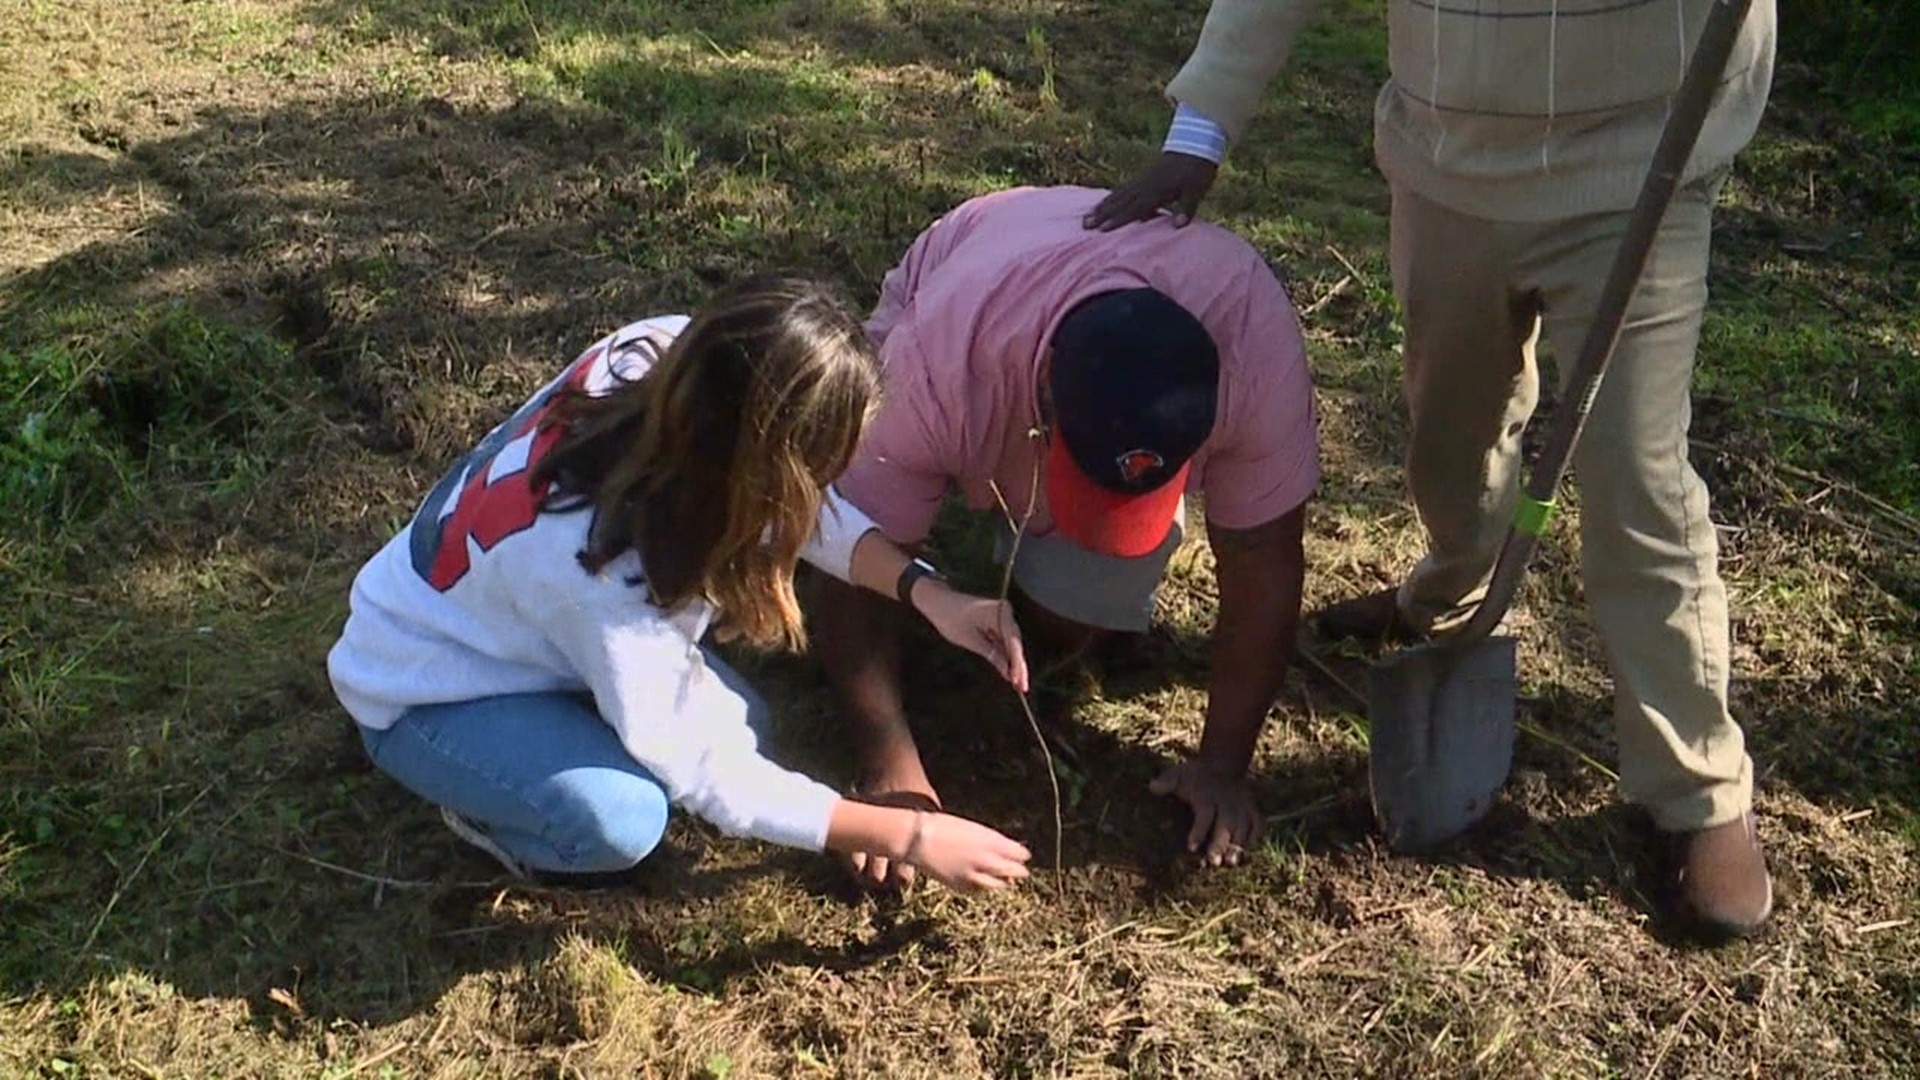 Student volunteers helped plant 100 trees on the campus of Bucknell to help lower the carbon footprint and to beautify campus.